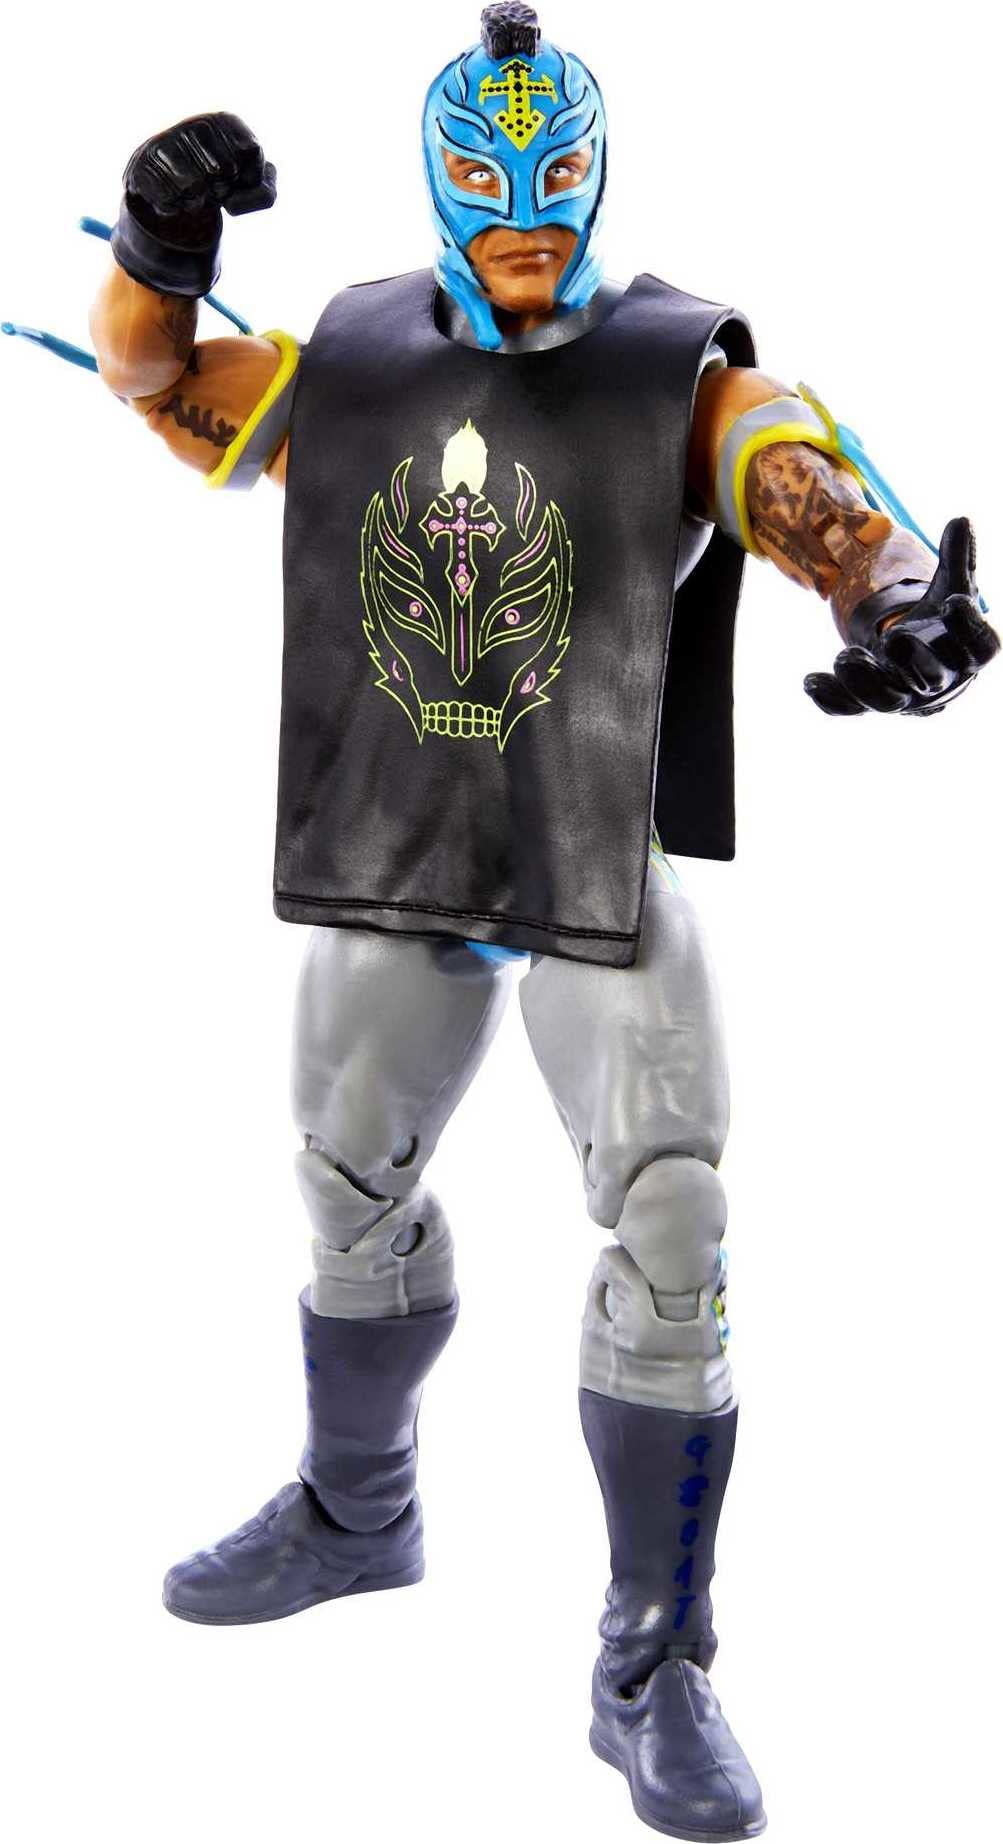 Mattel WWE John Cena Top Picks Elite Collection Action Figure with Entrance Shirt, 6-inch Posable Collectible Gift for WWE Fans Ages 8 Years Old & Up